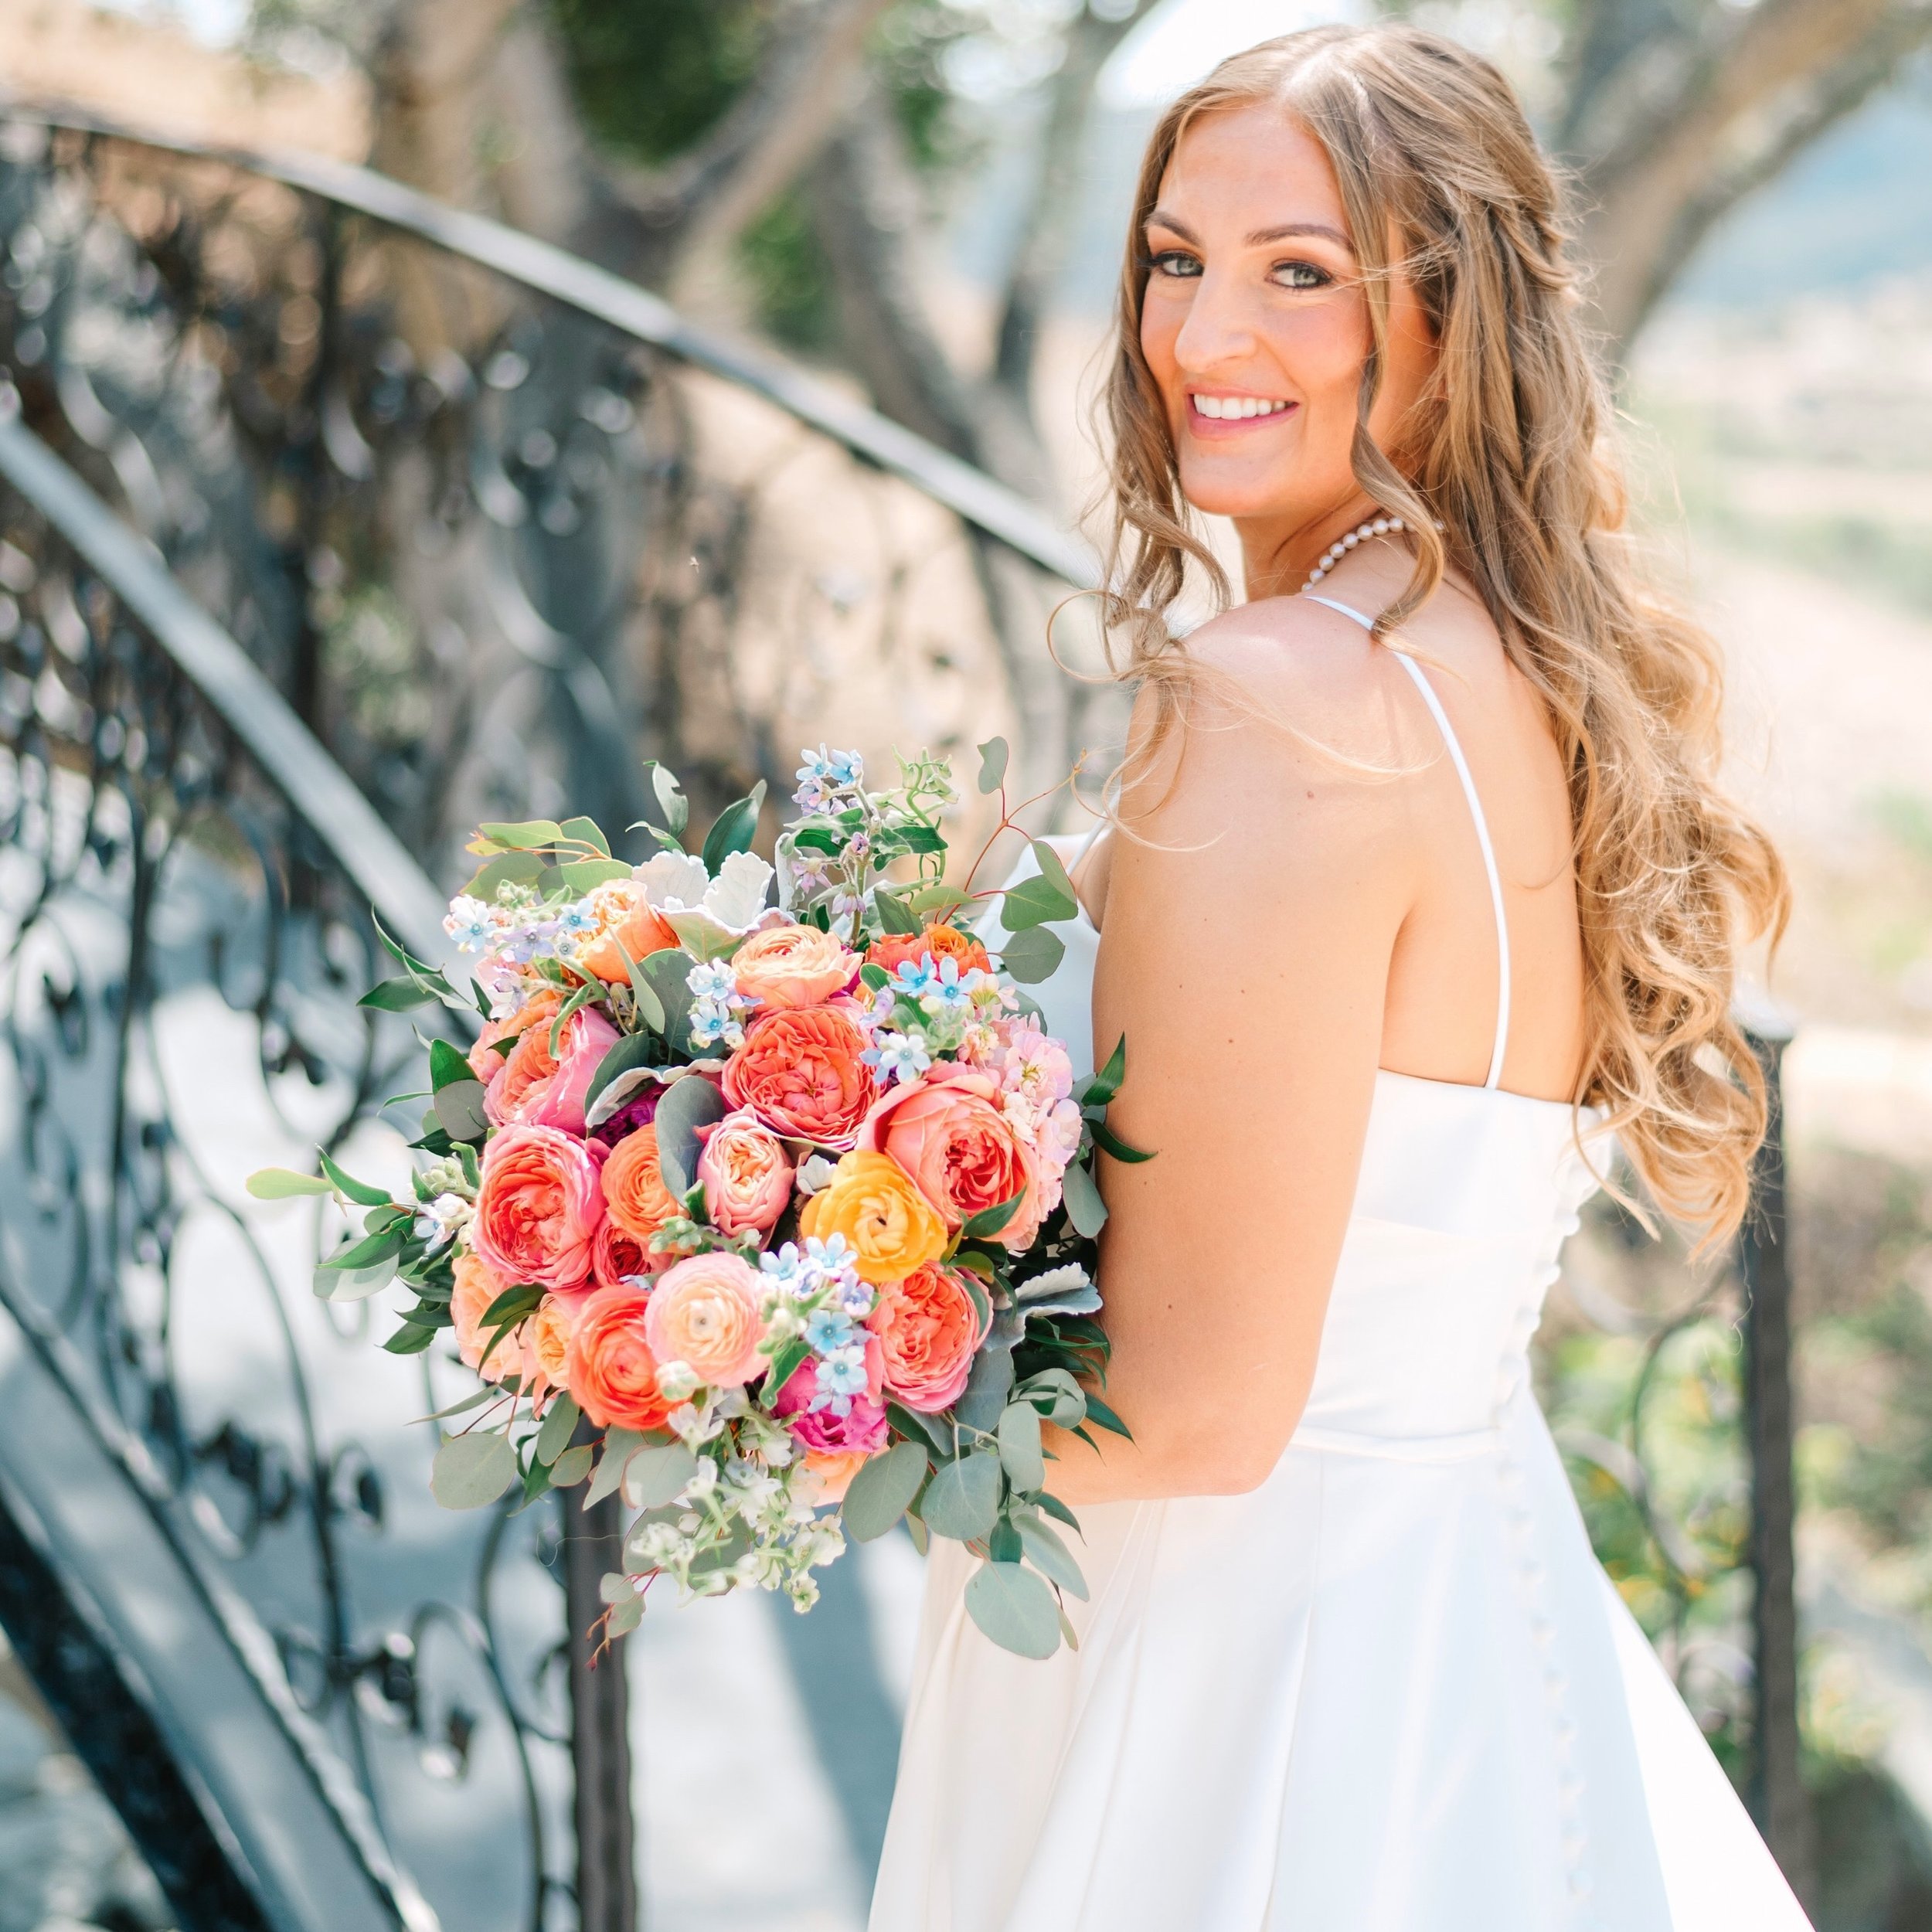 ✨💛🧡🩷🩵 Stunning Analise + her colorful Summer florals at Chateau Noland!

Can&rsquo;t wait to blog this colorful + fun wedding! 💛🧡🩷🩵✨